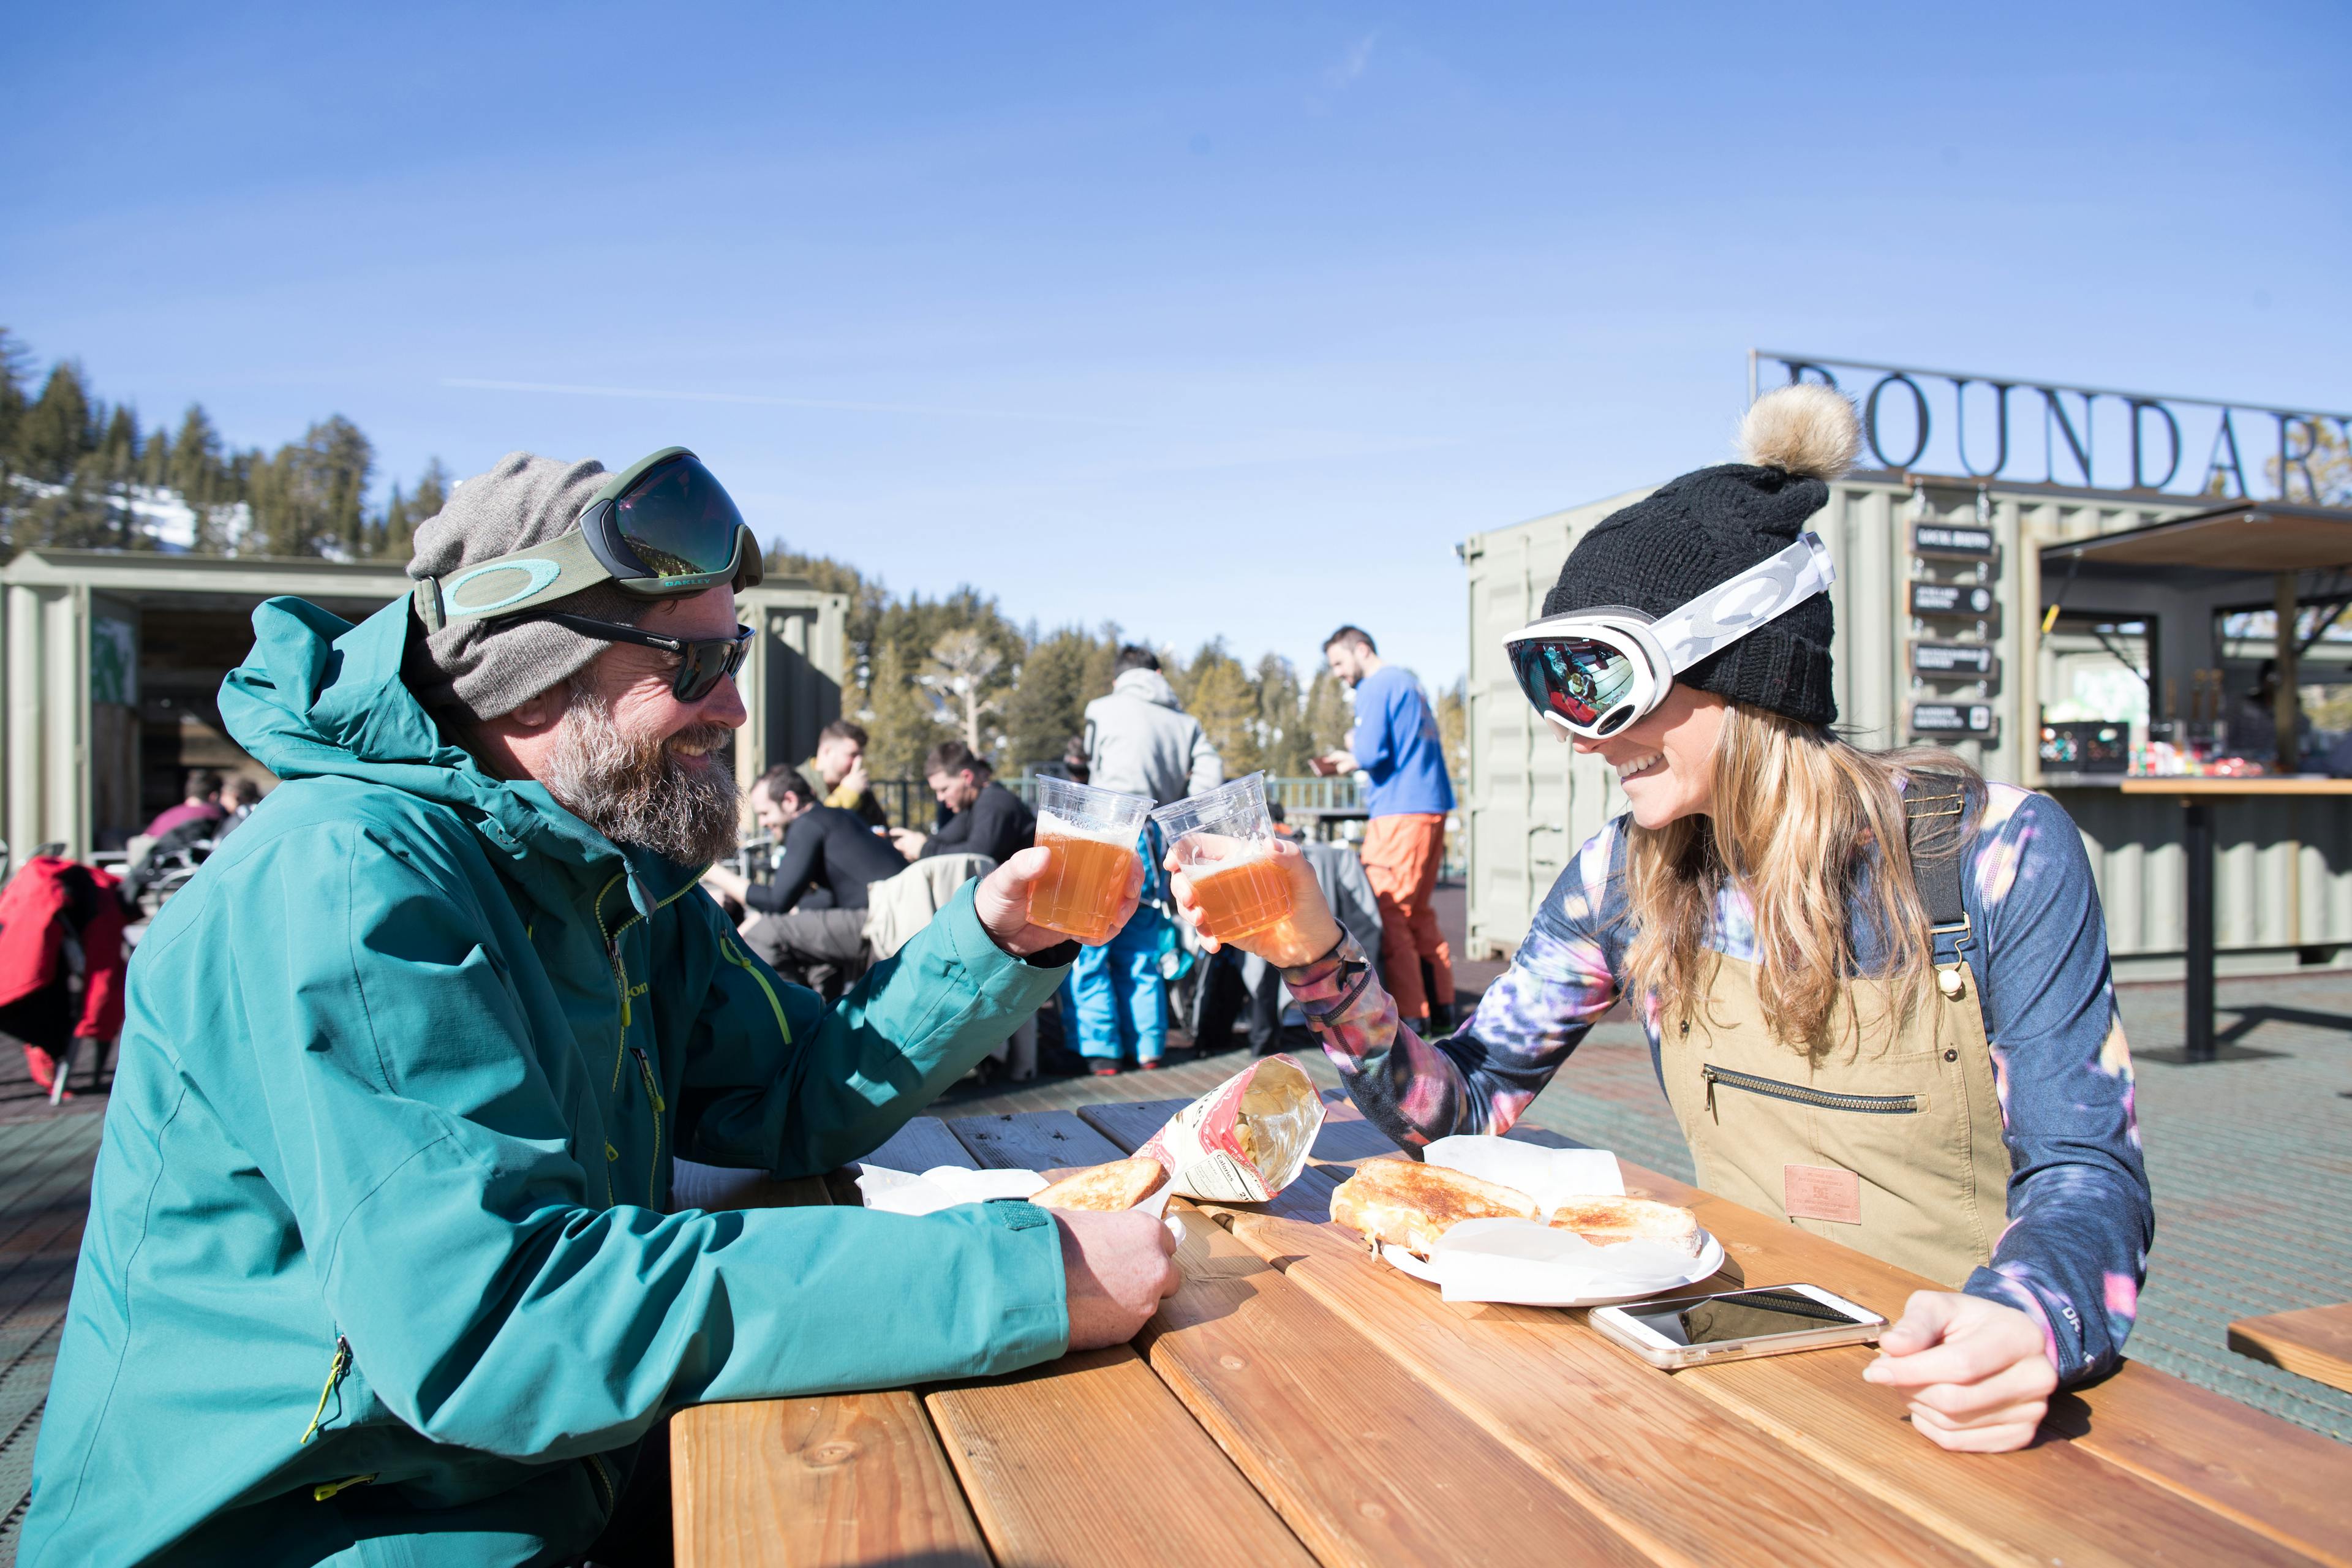 Man and woman in ski gear enjoying grilled cheese sandwiches at the Outpost